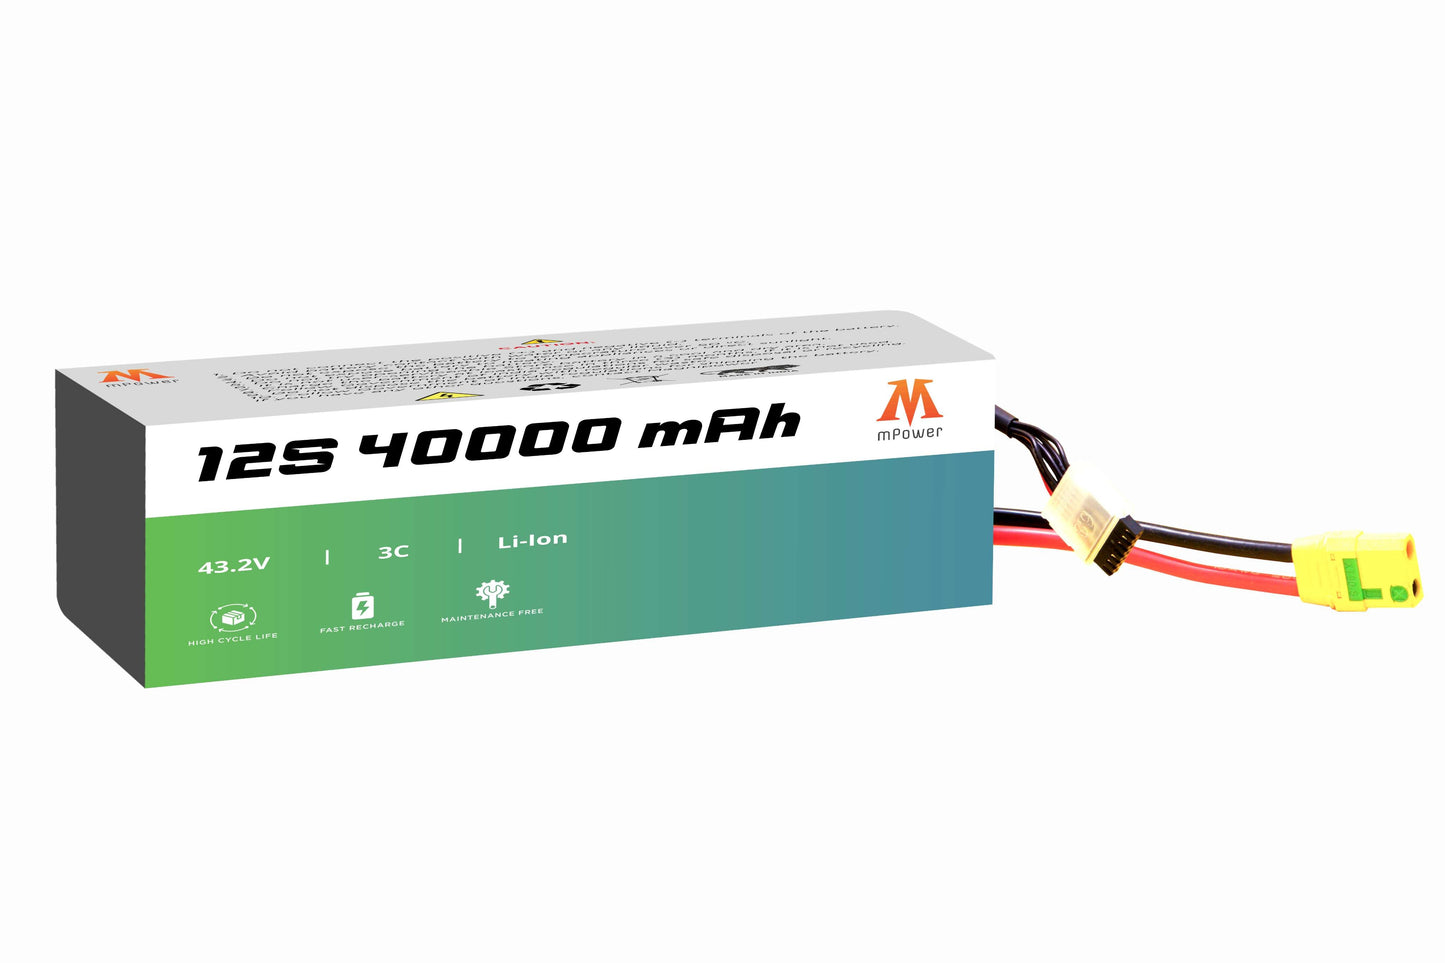 mPower 12S 40000mAh Lithium-Ion Battery for Delivery Drones